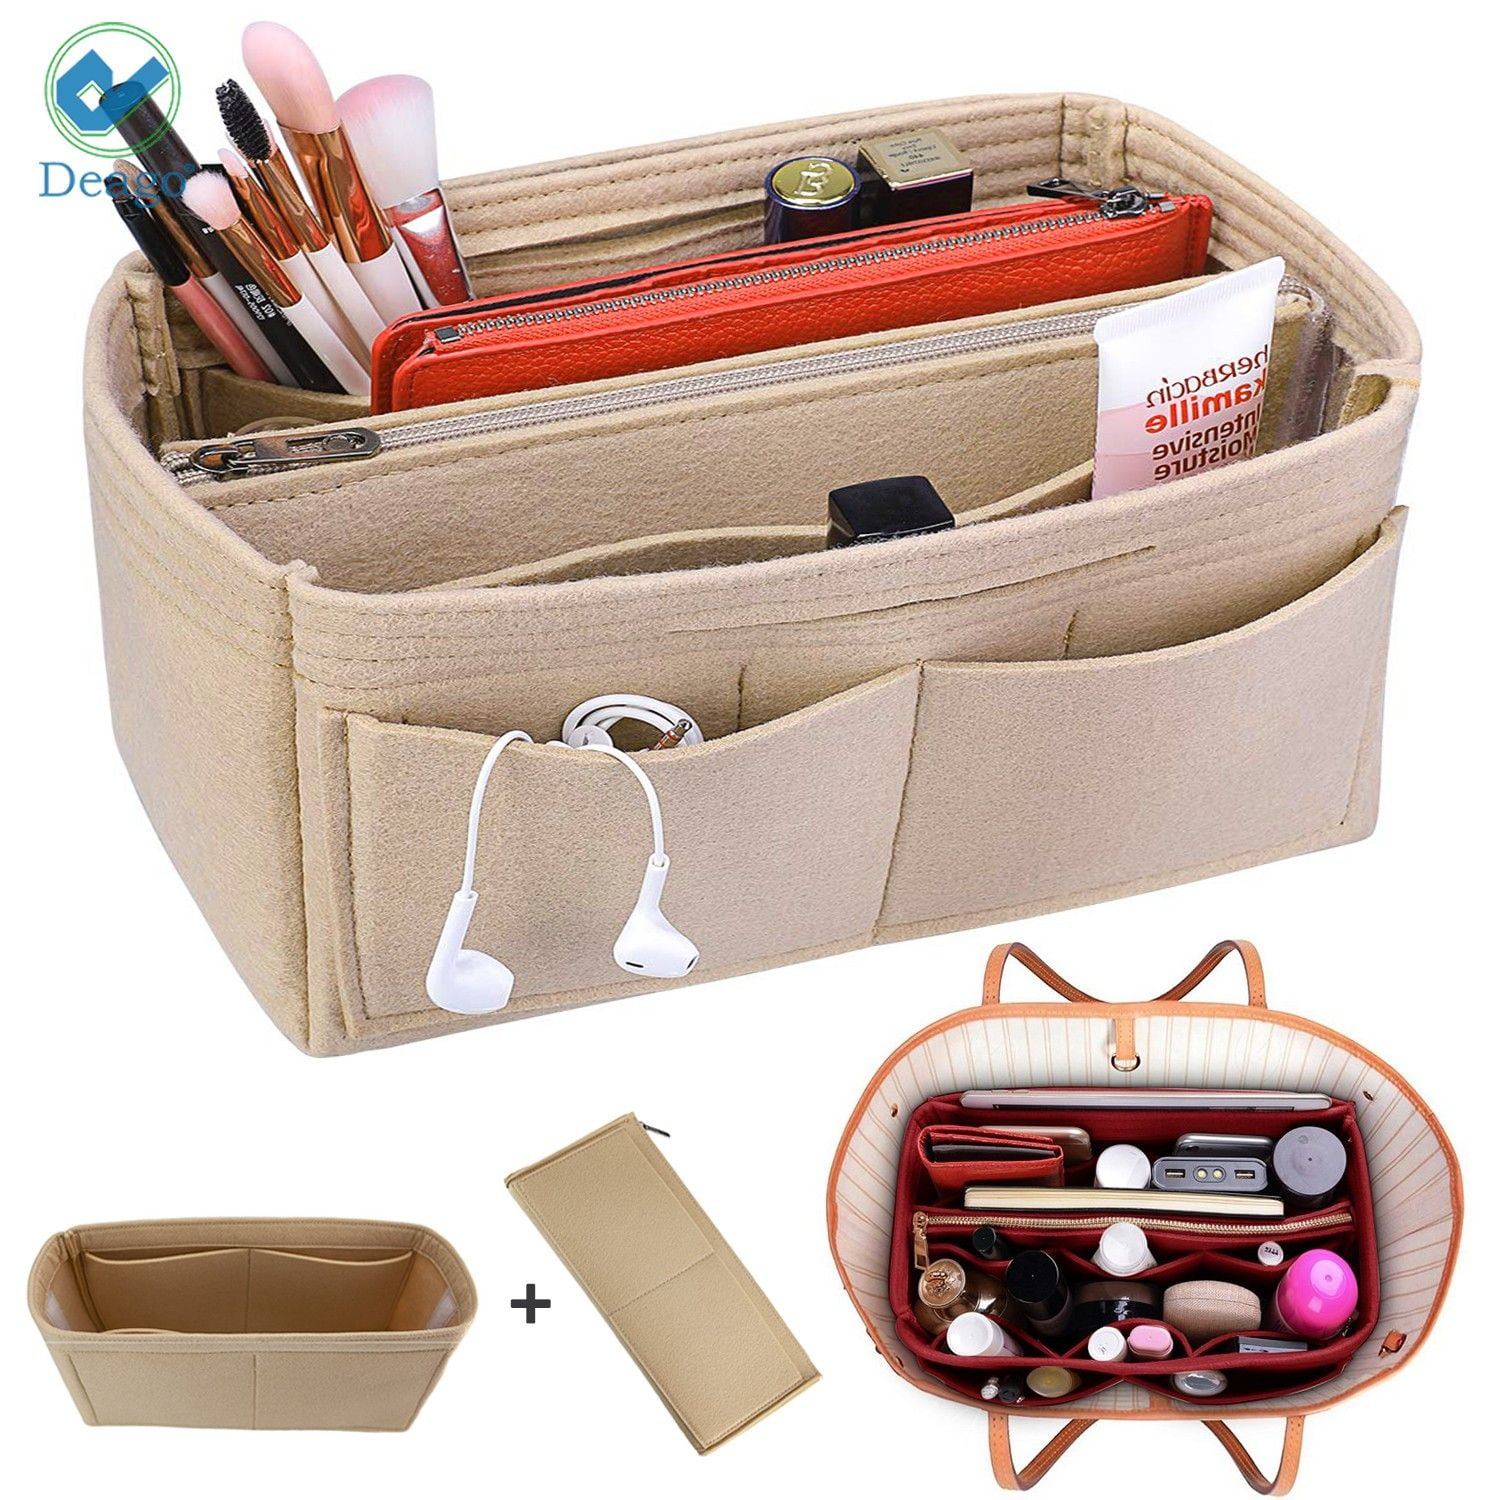 Bag in Bag 5 Size Bag Organizer Perfect for Speedy Neverfull and More Purse Organizer Insert X-Large, Brush Pink 